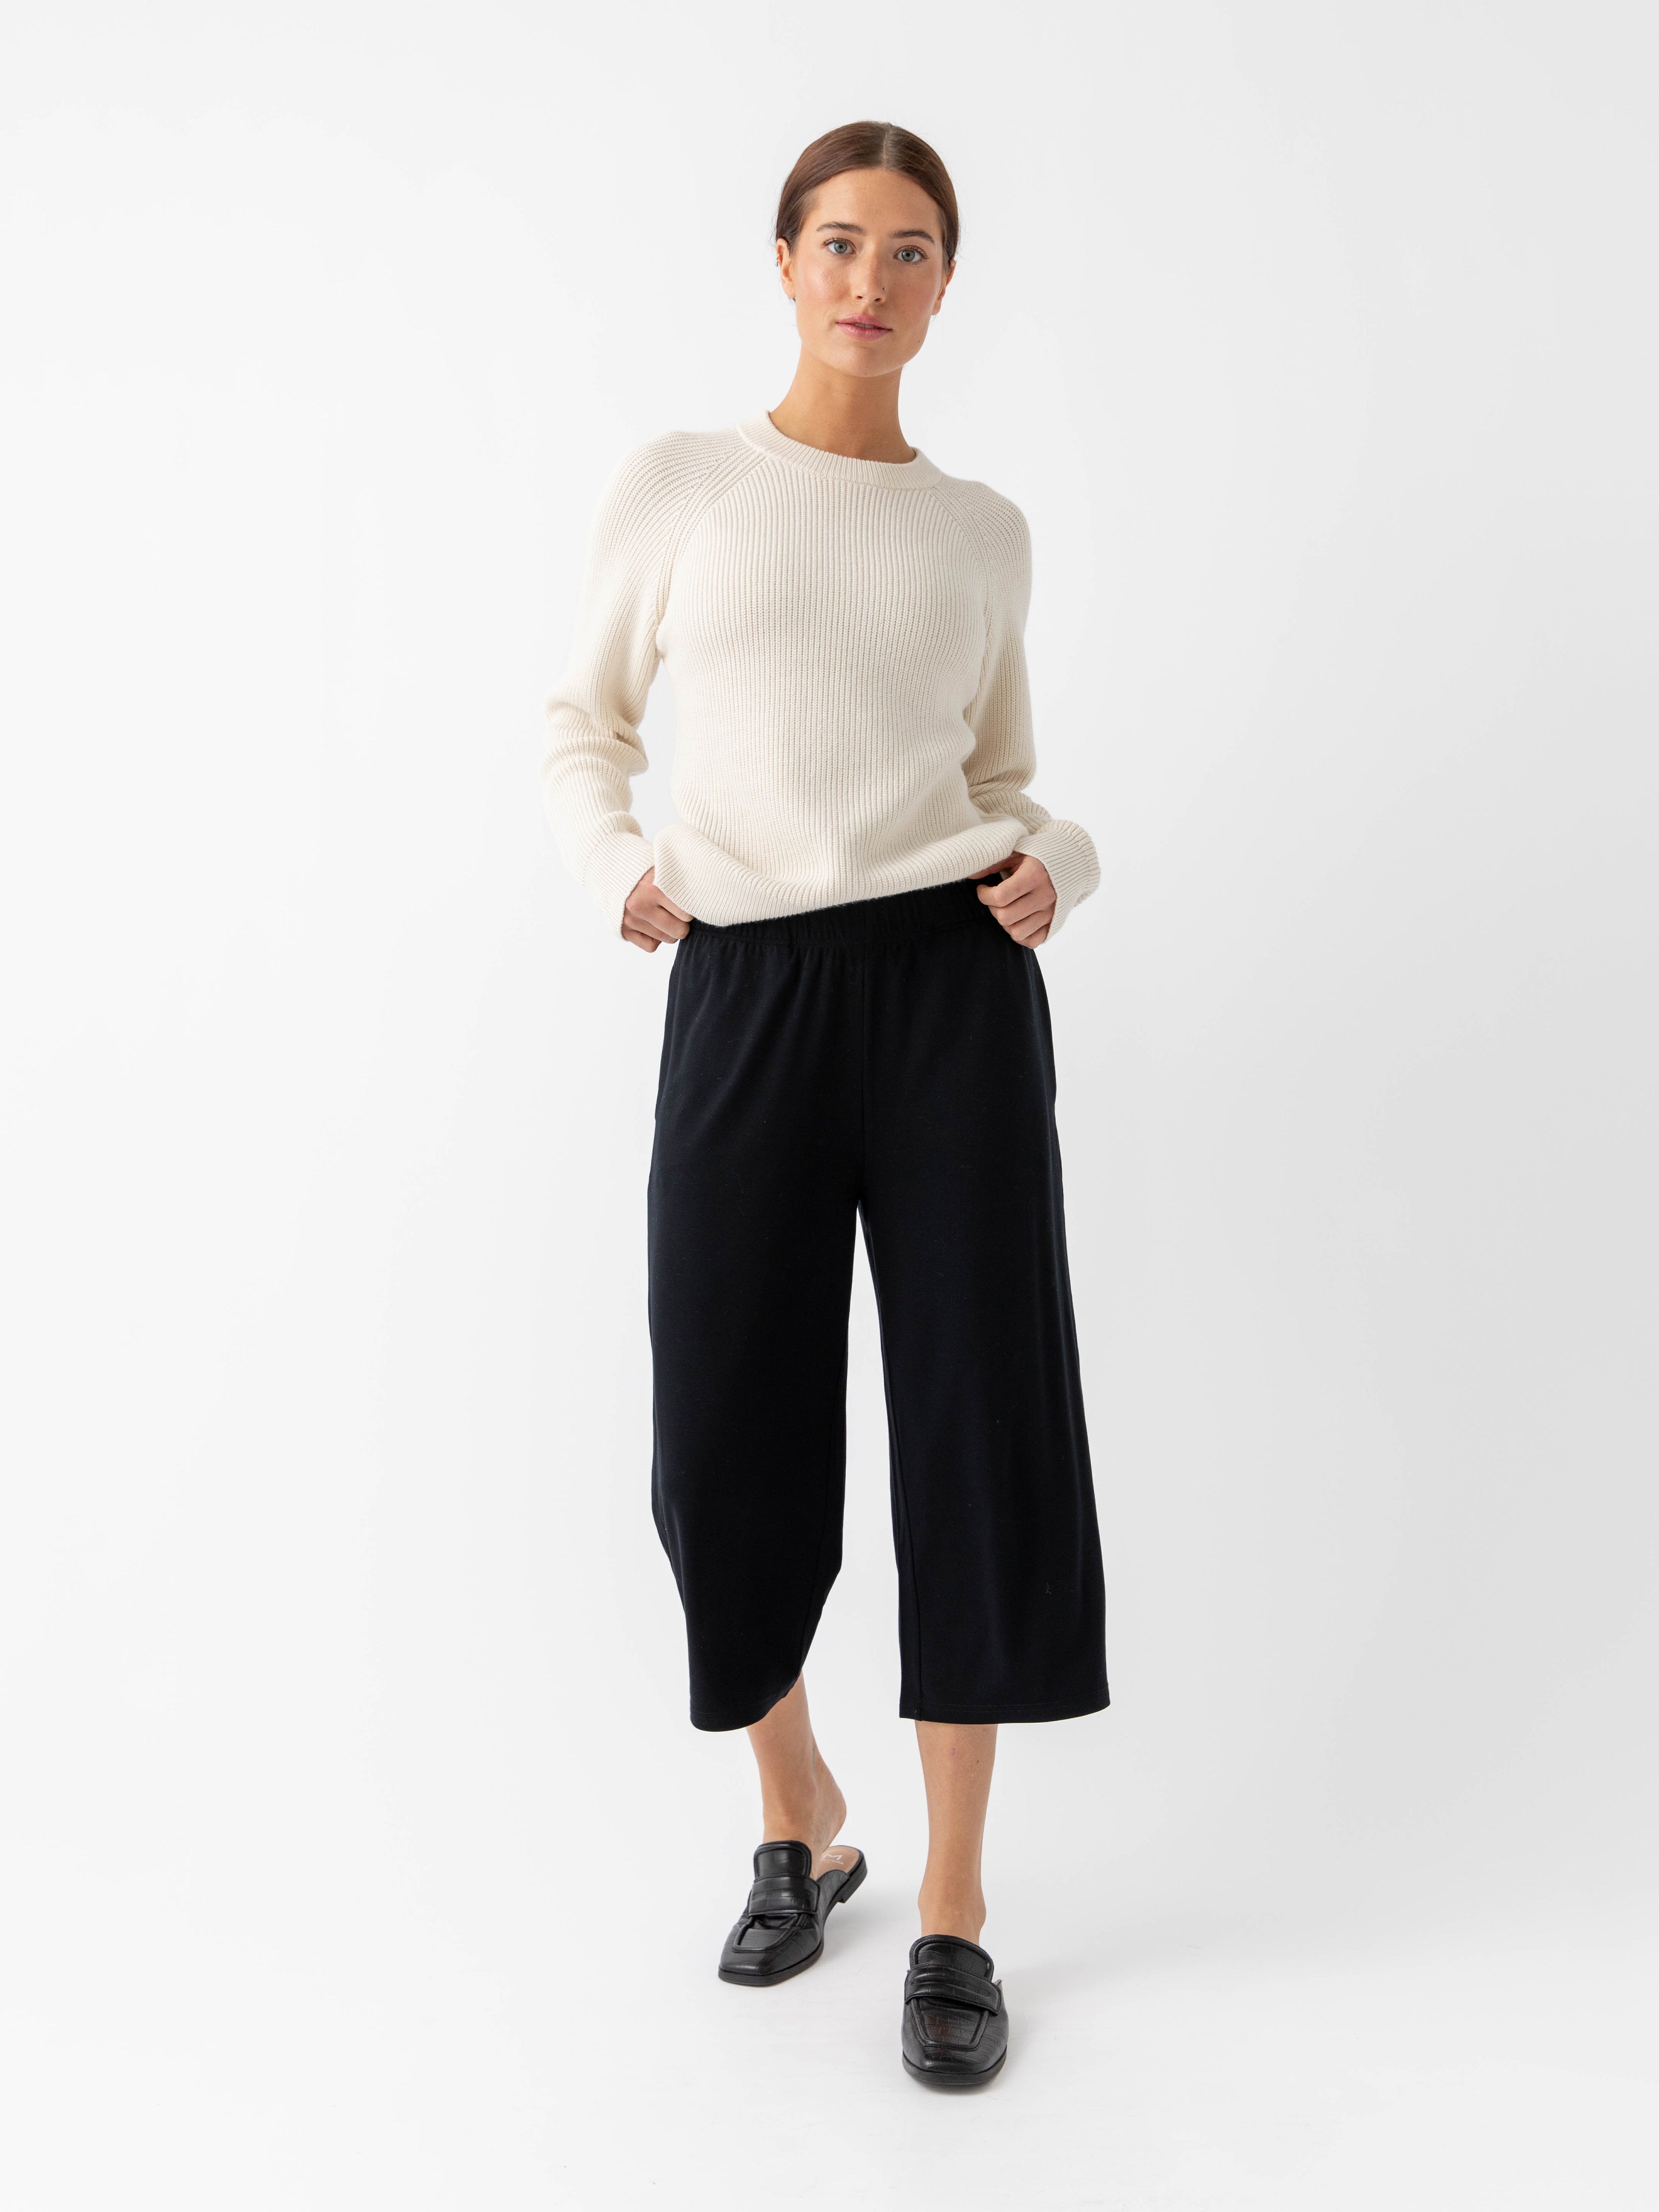 Woman wearing alabaster classic crewneck and black pants with white background |Color:Alabaster